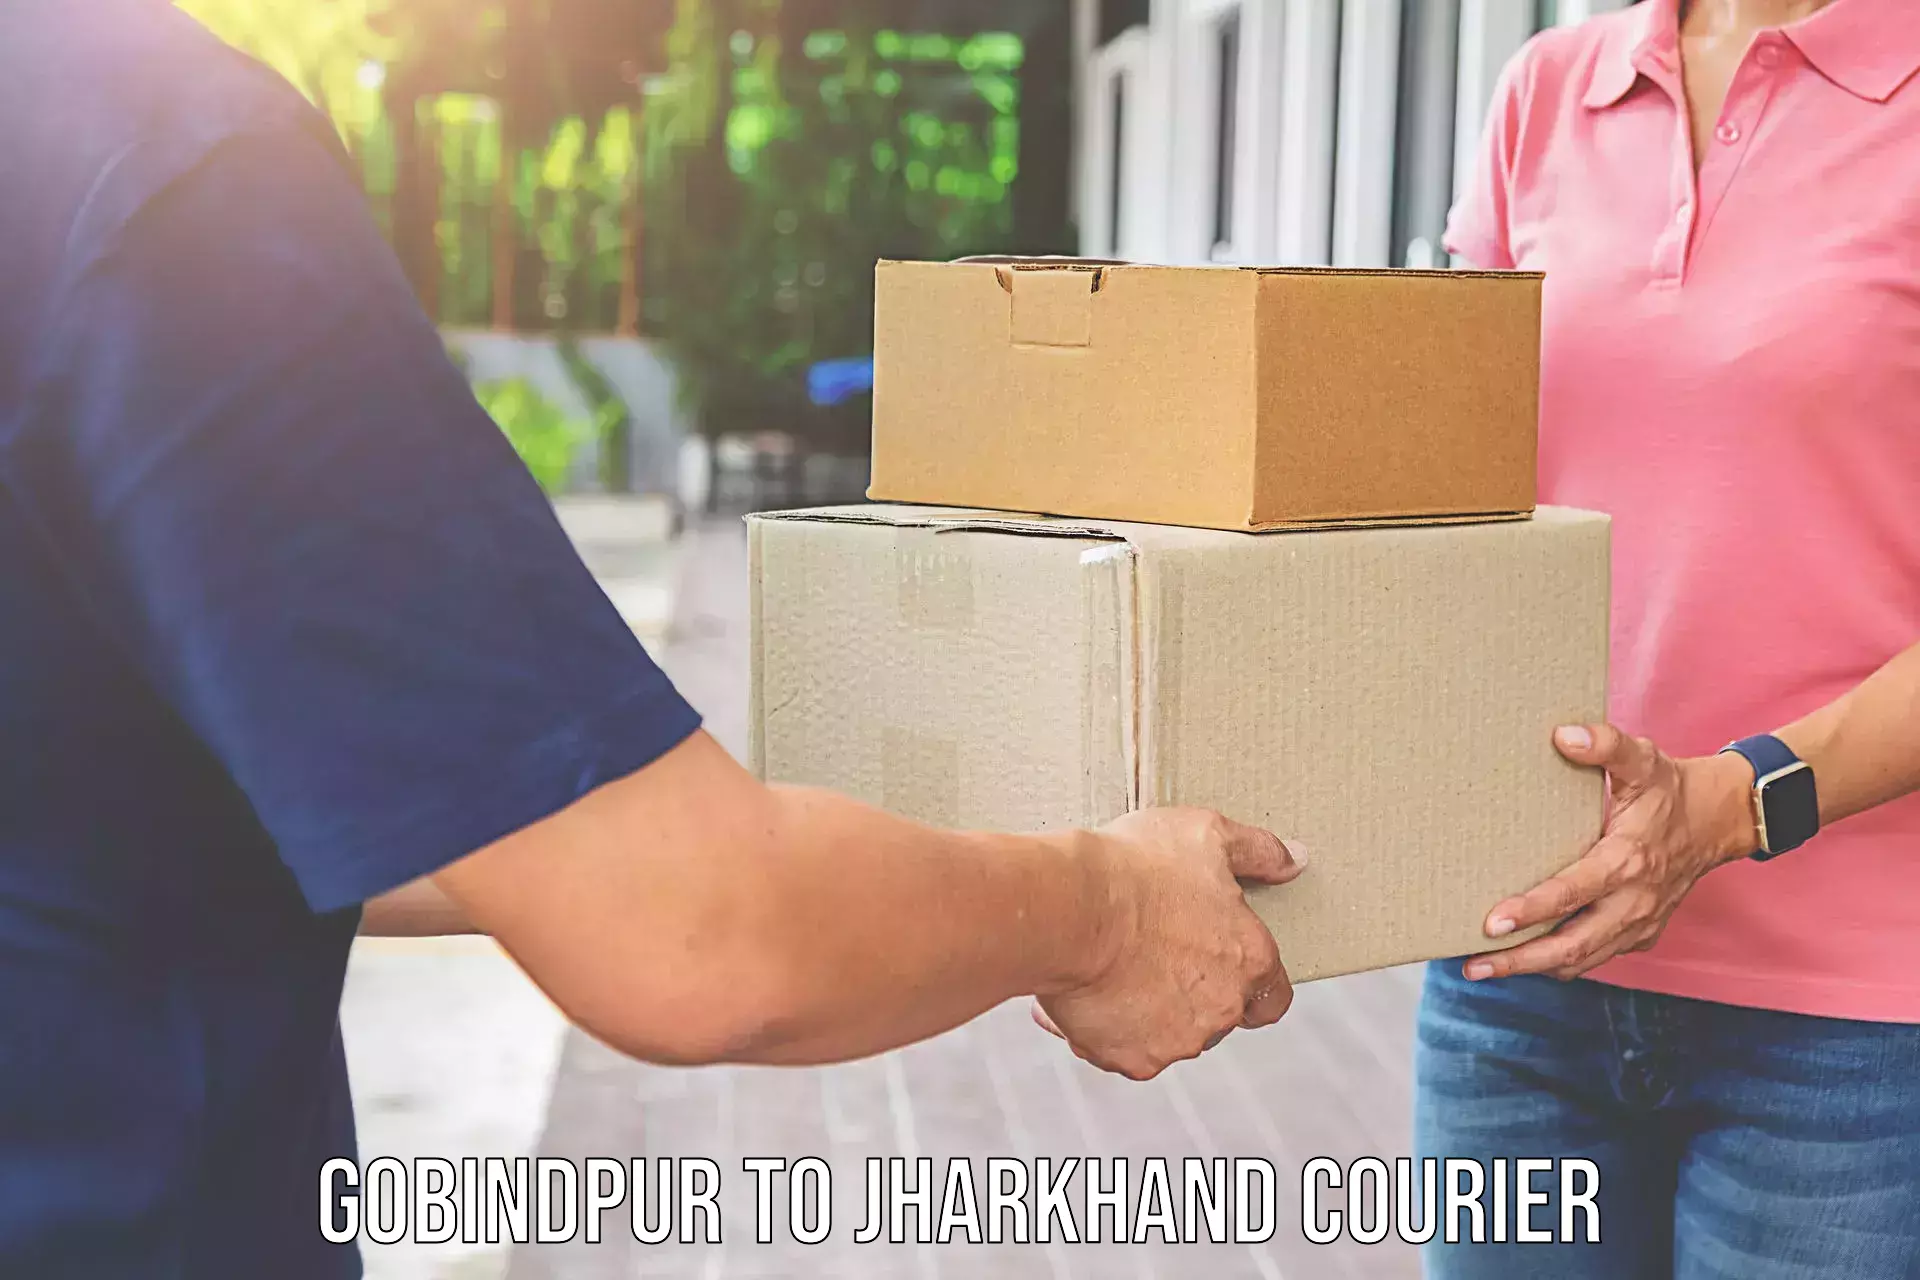 Furniture delivery service Gobindpur to Jharkhand